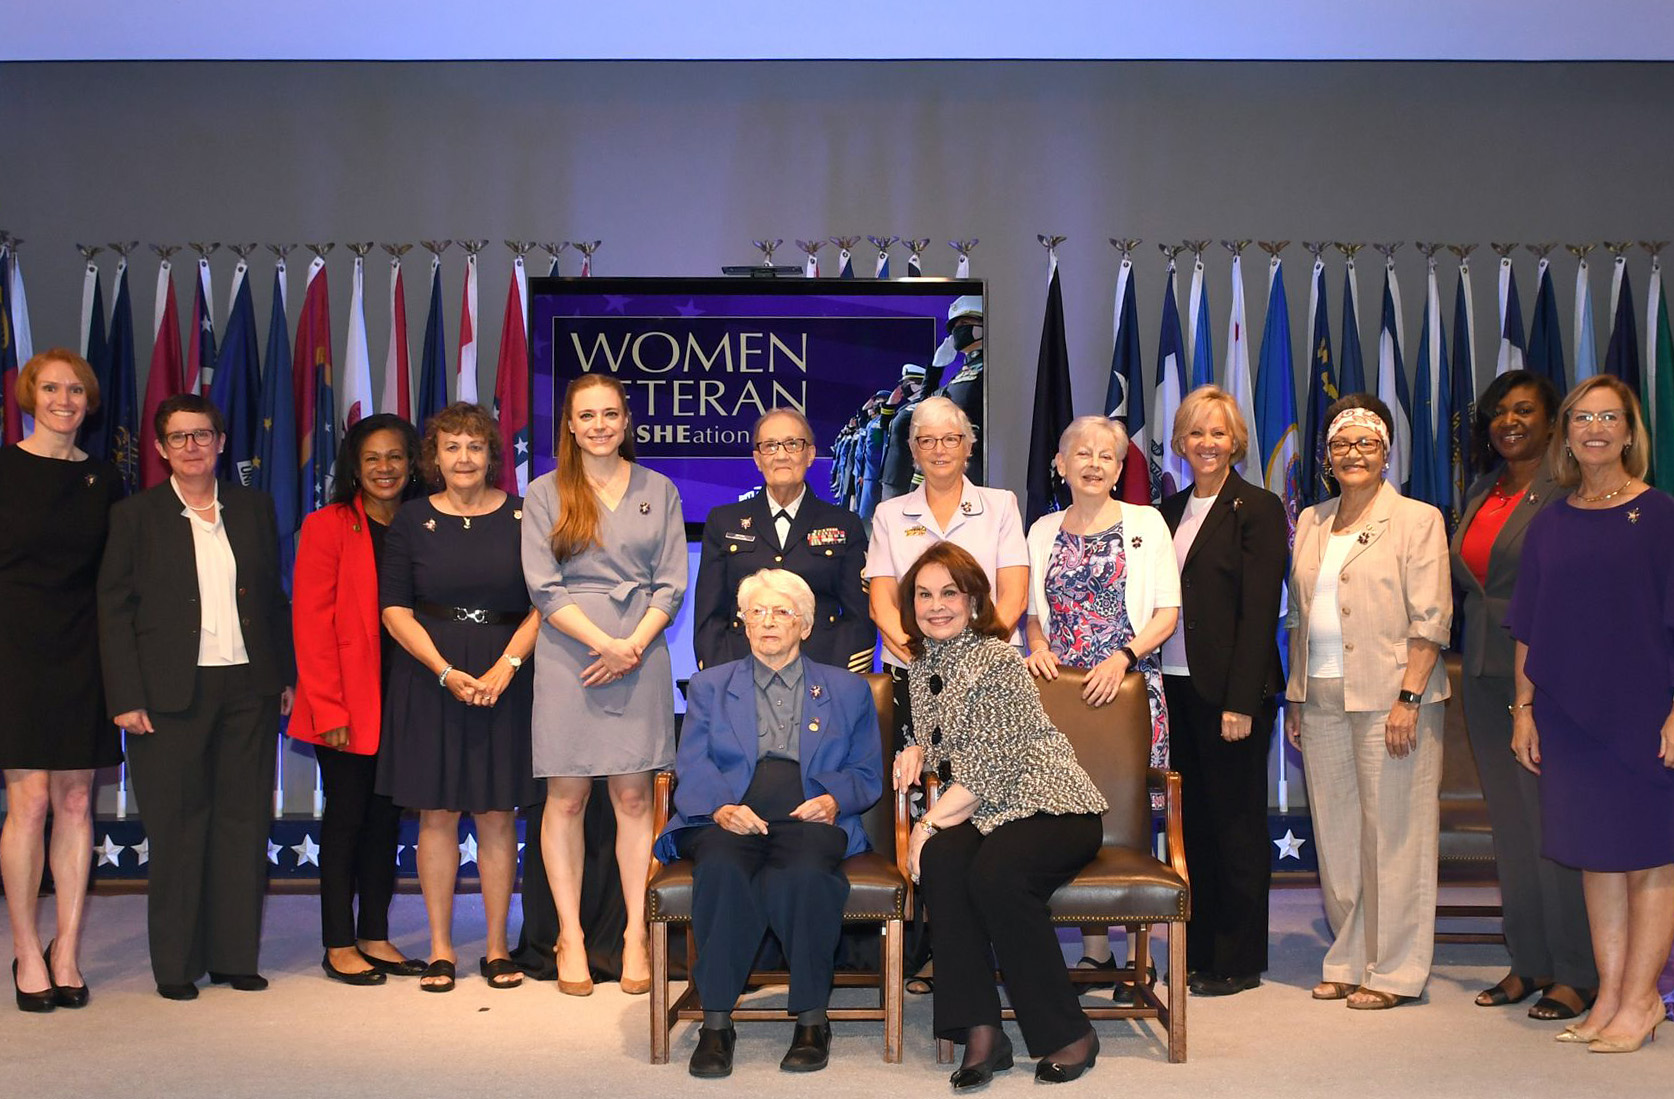 Jewelry designer Ann Hand (bottom right) sits with military women gifted with her new brooch at the Military Women’s Memorial, June 12, 2021. This date coincides with the 73rd anniversary of the Women’s Armed Services Integration Act, which enabled military women to join the active duty component of each branch of service. It is also recognized as Women Veterans Day by some U.S. states. Women veterans representing the enlisted and commissioned ranks of each military branch were given the brooch to wear as a symbol of their selfless service. The brooch is designed in the shape of a forget-me-not flower, colored purple to represent all the services. The “V” on each leaf represents the valor of America’s servicewomen and the pearl in the center represents the purity of their mission.